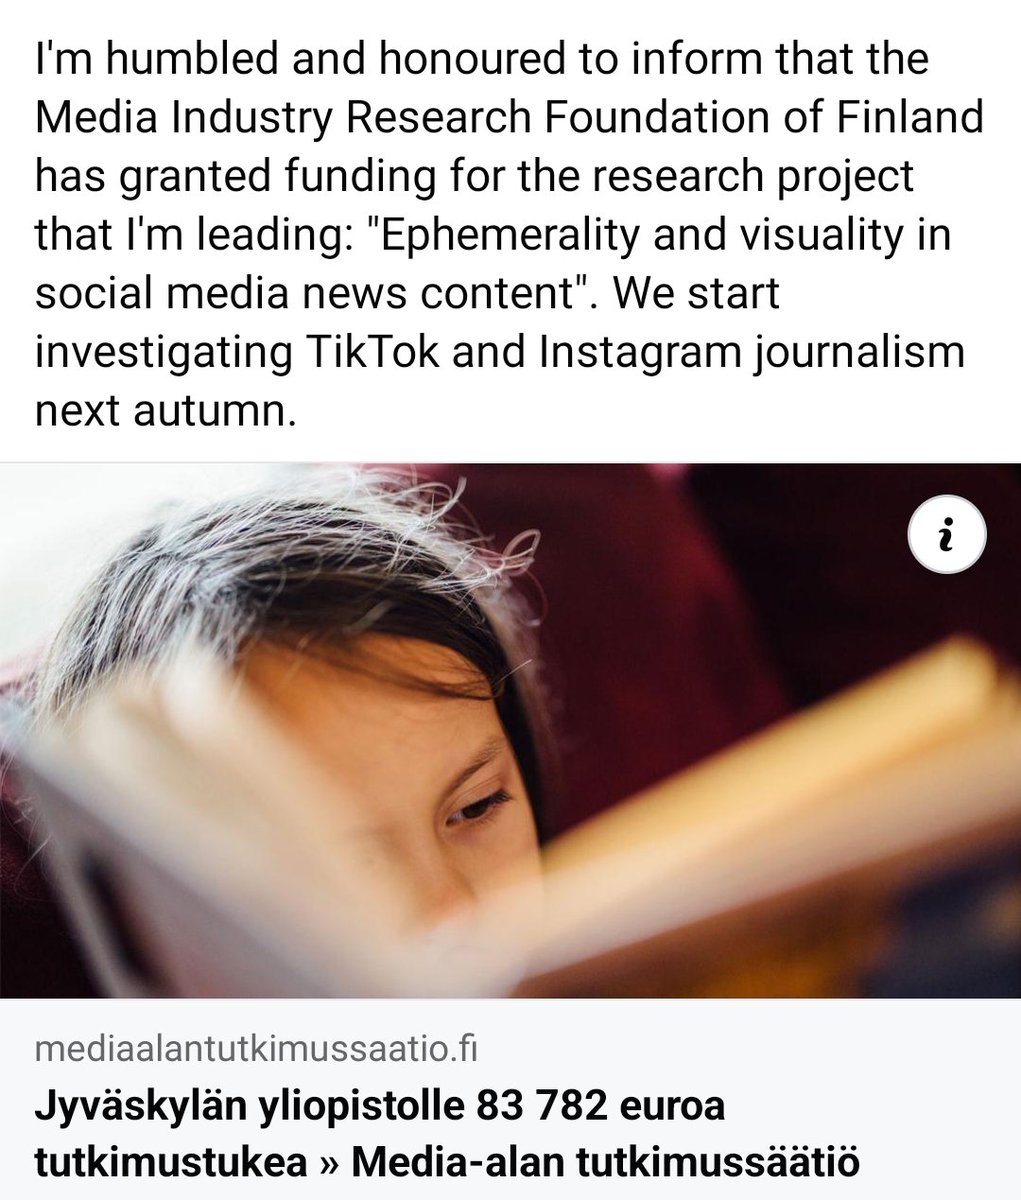 📢Funding news 📢 Thank you @mediasaatio for the support and trust. Our @uniofjyvaskyla research group is Veera Ehrlén, @TuroUskali @ooseuri and our international collaborators @JnthnHndrckx @dianabossio